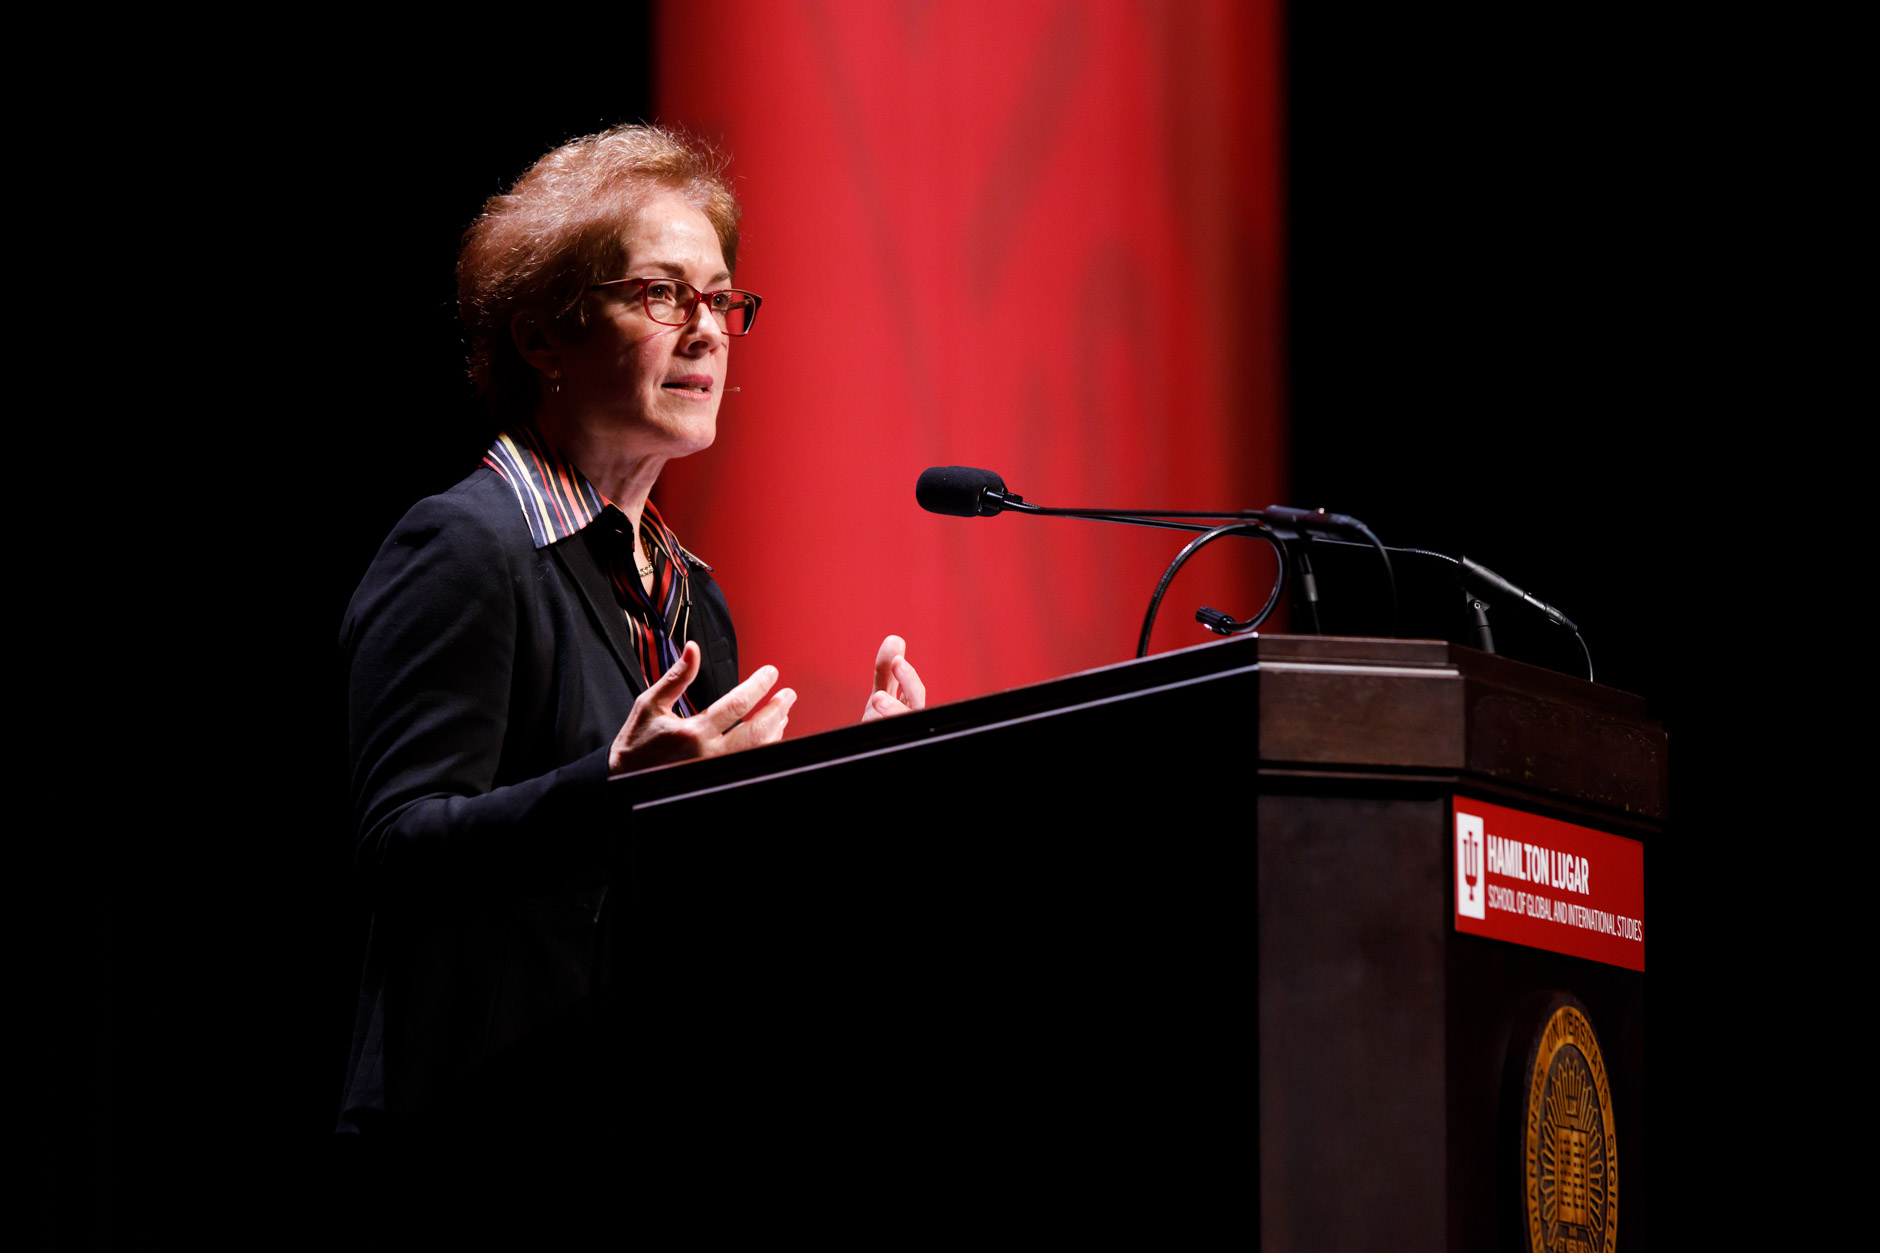 Former U.S. Ambassador to Ukraine Marie Yovanovitch speaks during the America's Role in the World Conference at IU Bloomington on Friday, March 6, 2020. (James Brosher/Indiana University)